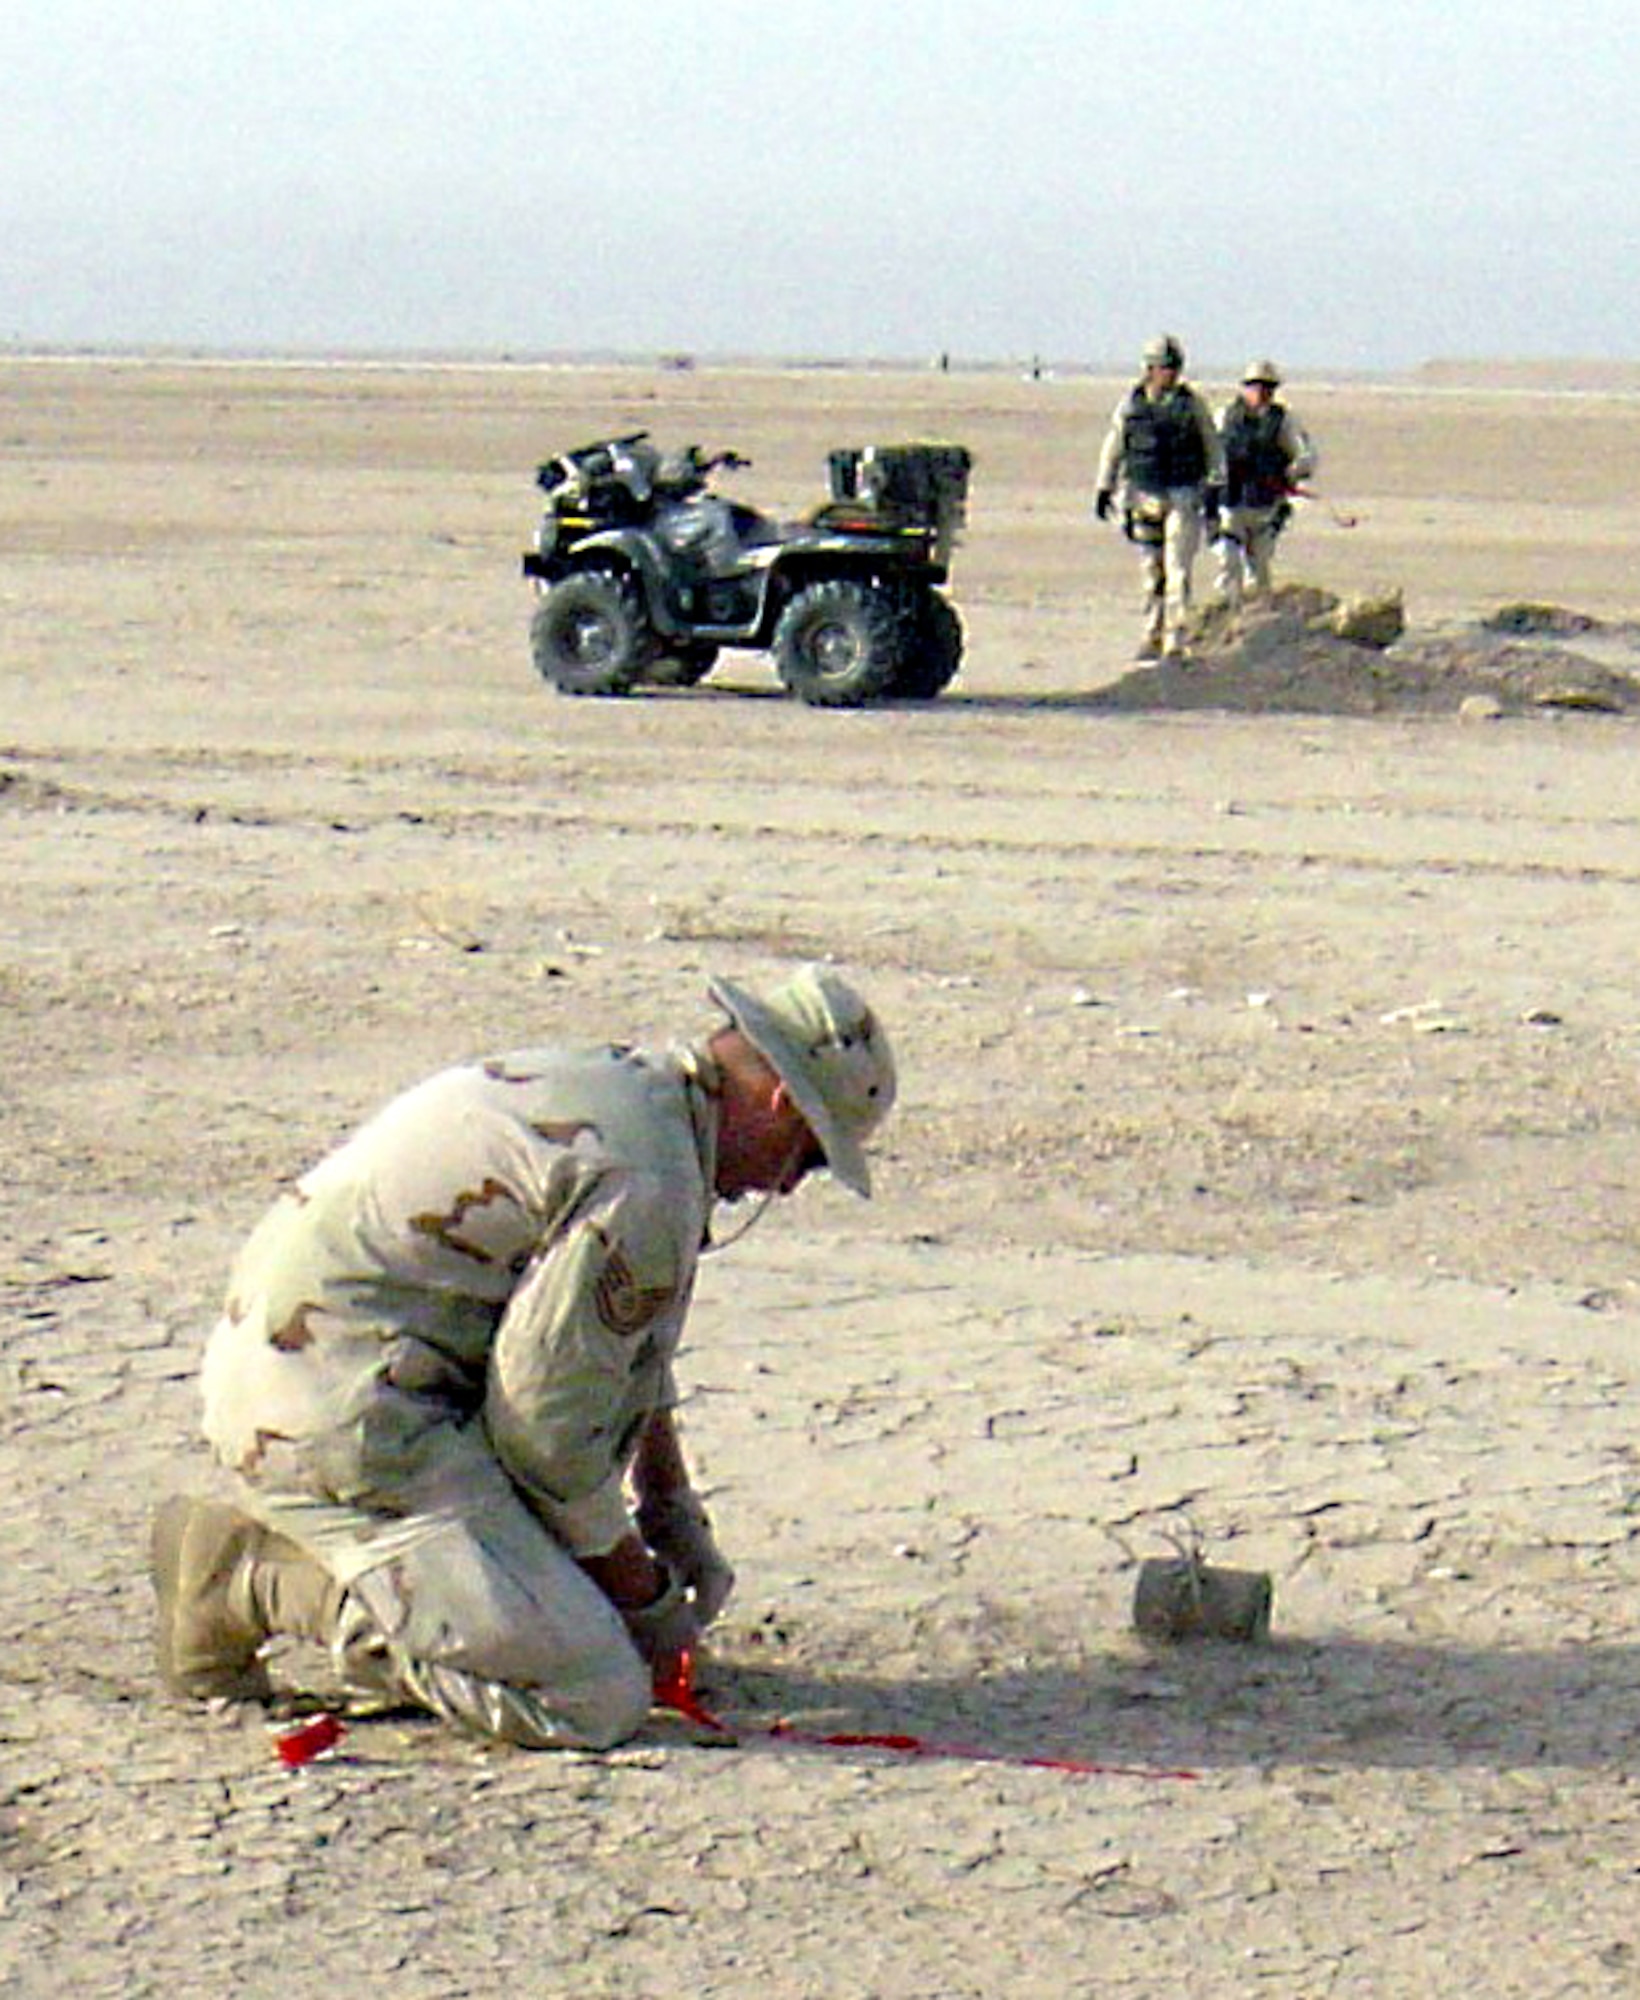 OPERATION IRAQI FREEDOM -- An Airborne Red Horse explosive ordnance technician marks an unexploded submunition at a seized airfield in Iraq.  He is a member of one of three new Airborne Red Horse teams that can be inserted into remote and inaccessible airfields by parachute or assault helicopter.  (Air Force photo by Master Sgt. Michael Haque)
